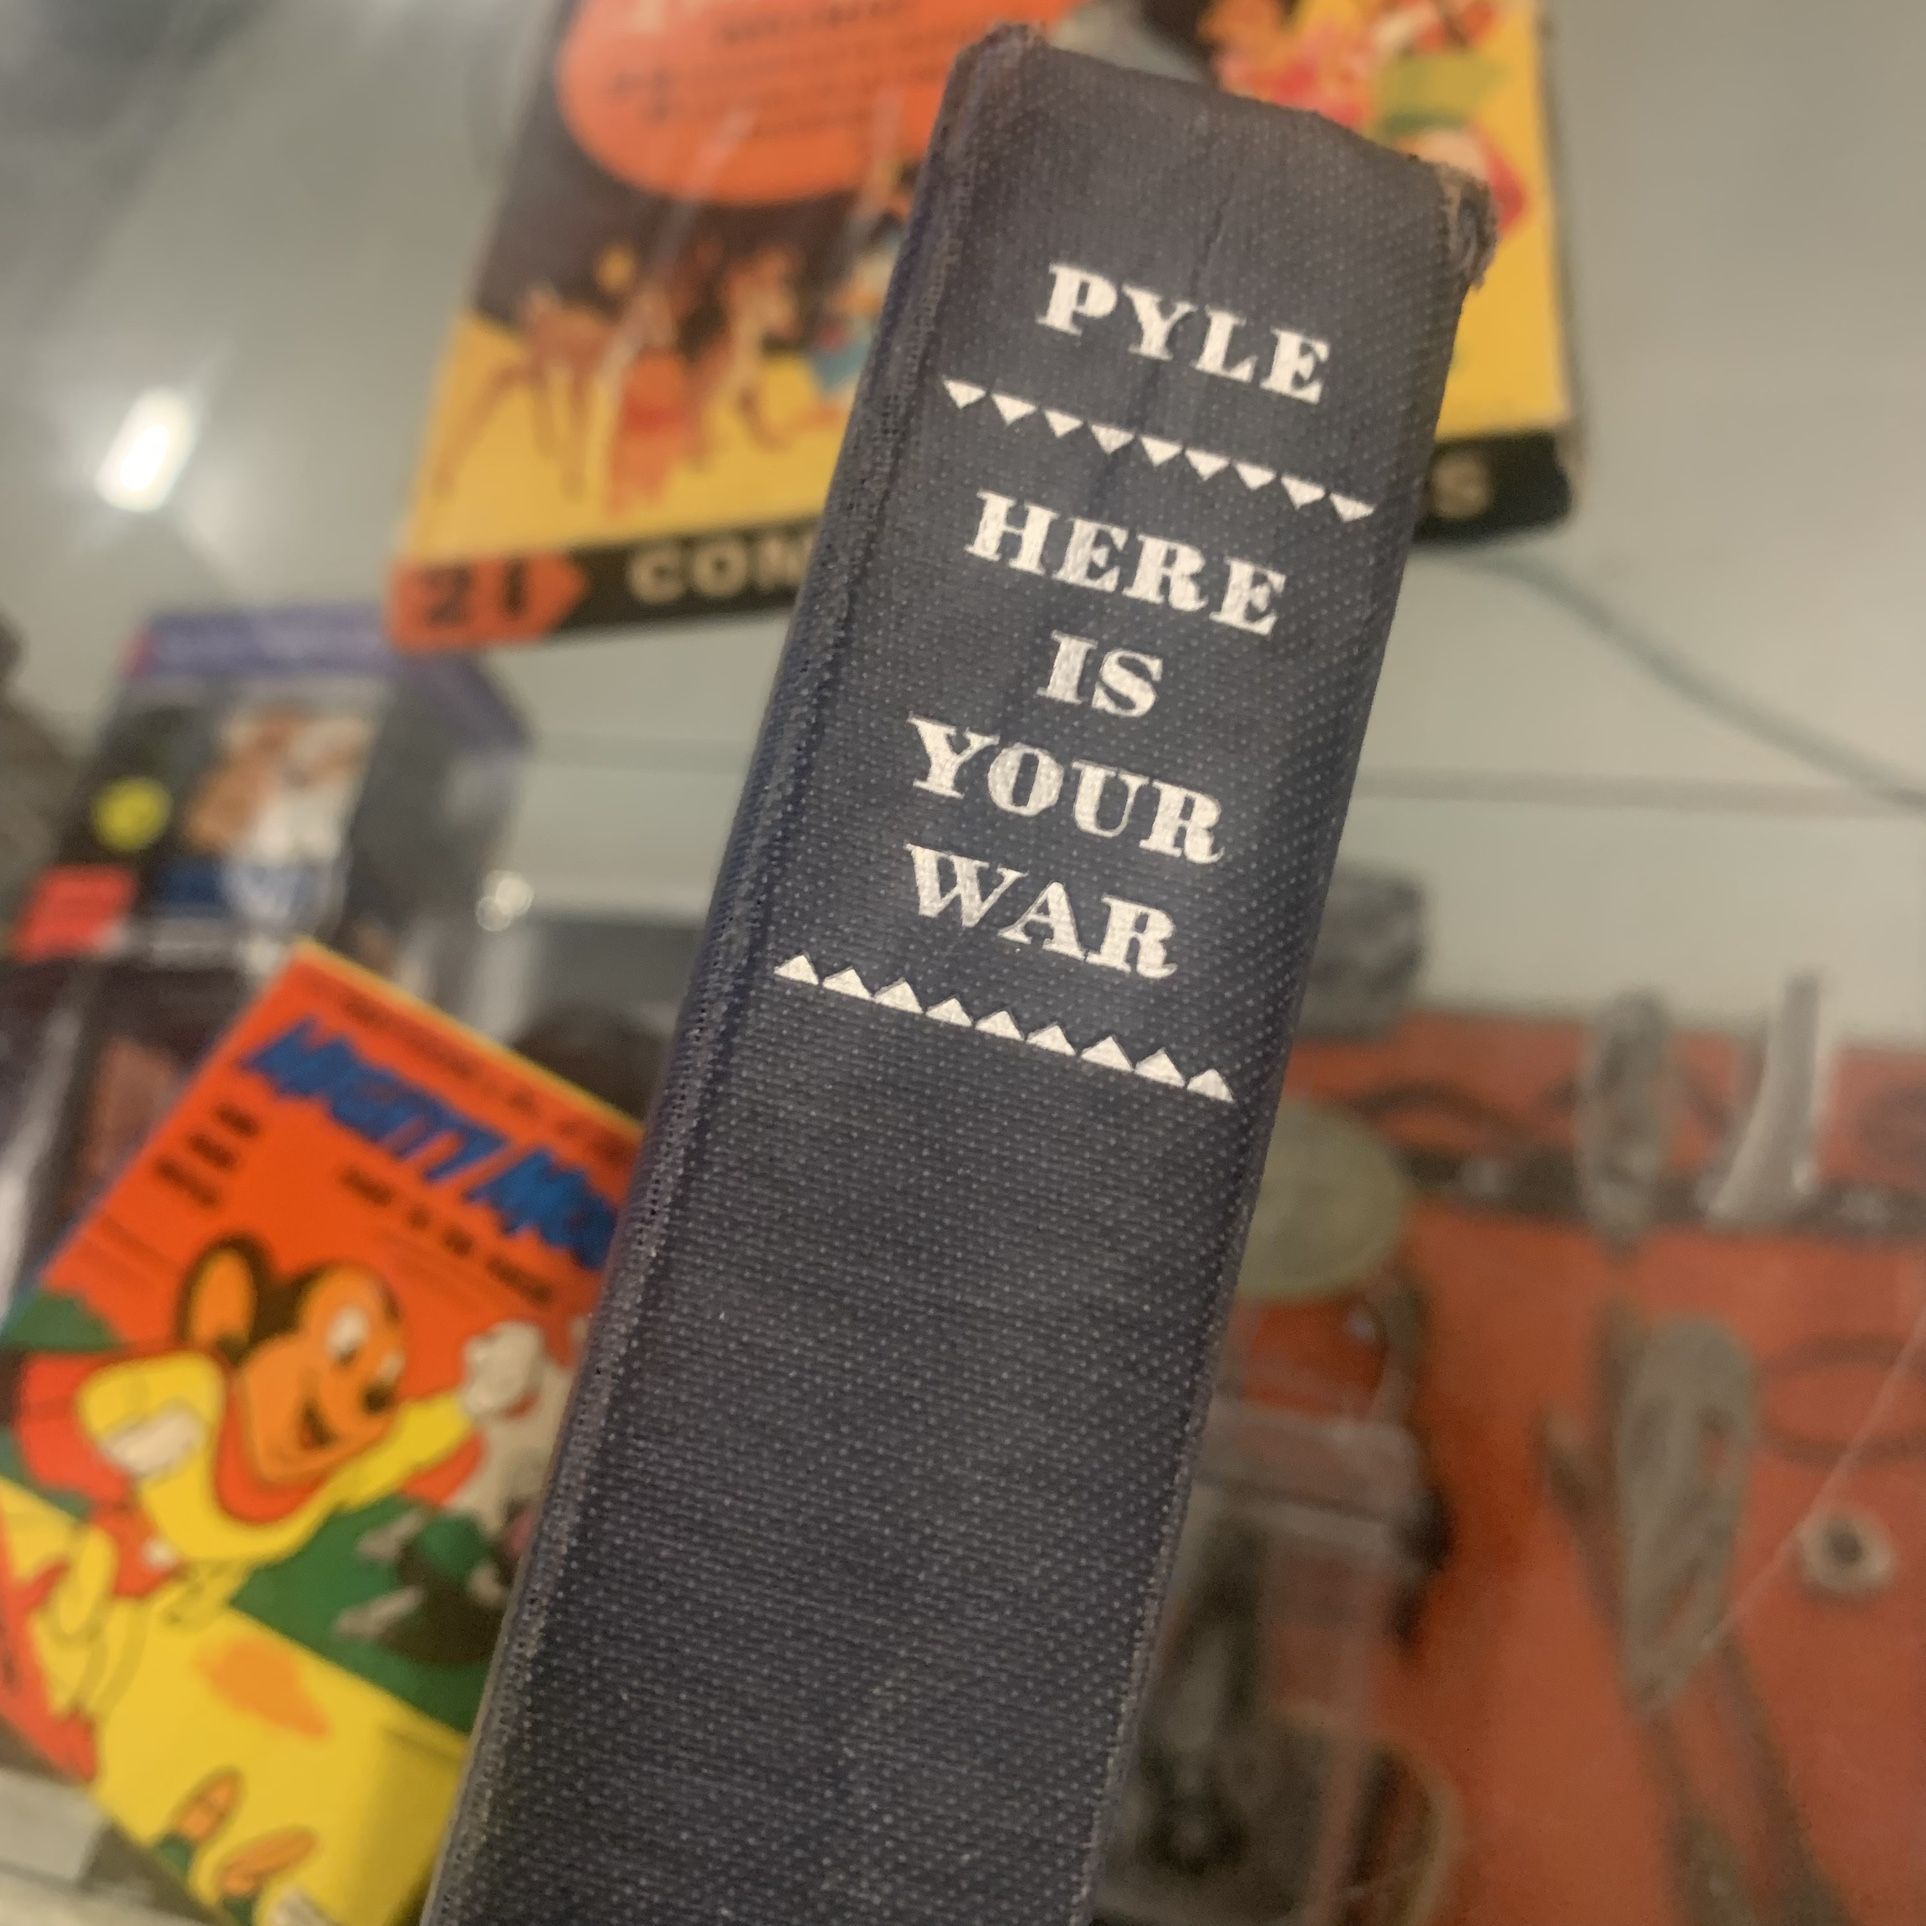 Rare Vintage Book “Here Is Your War”